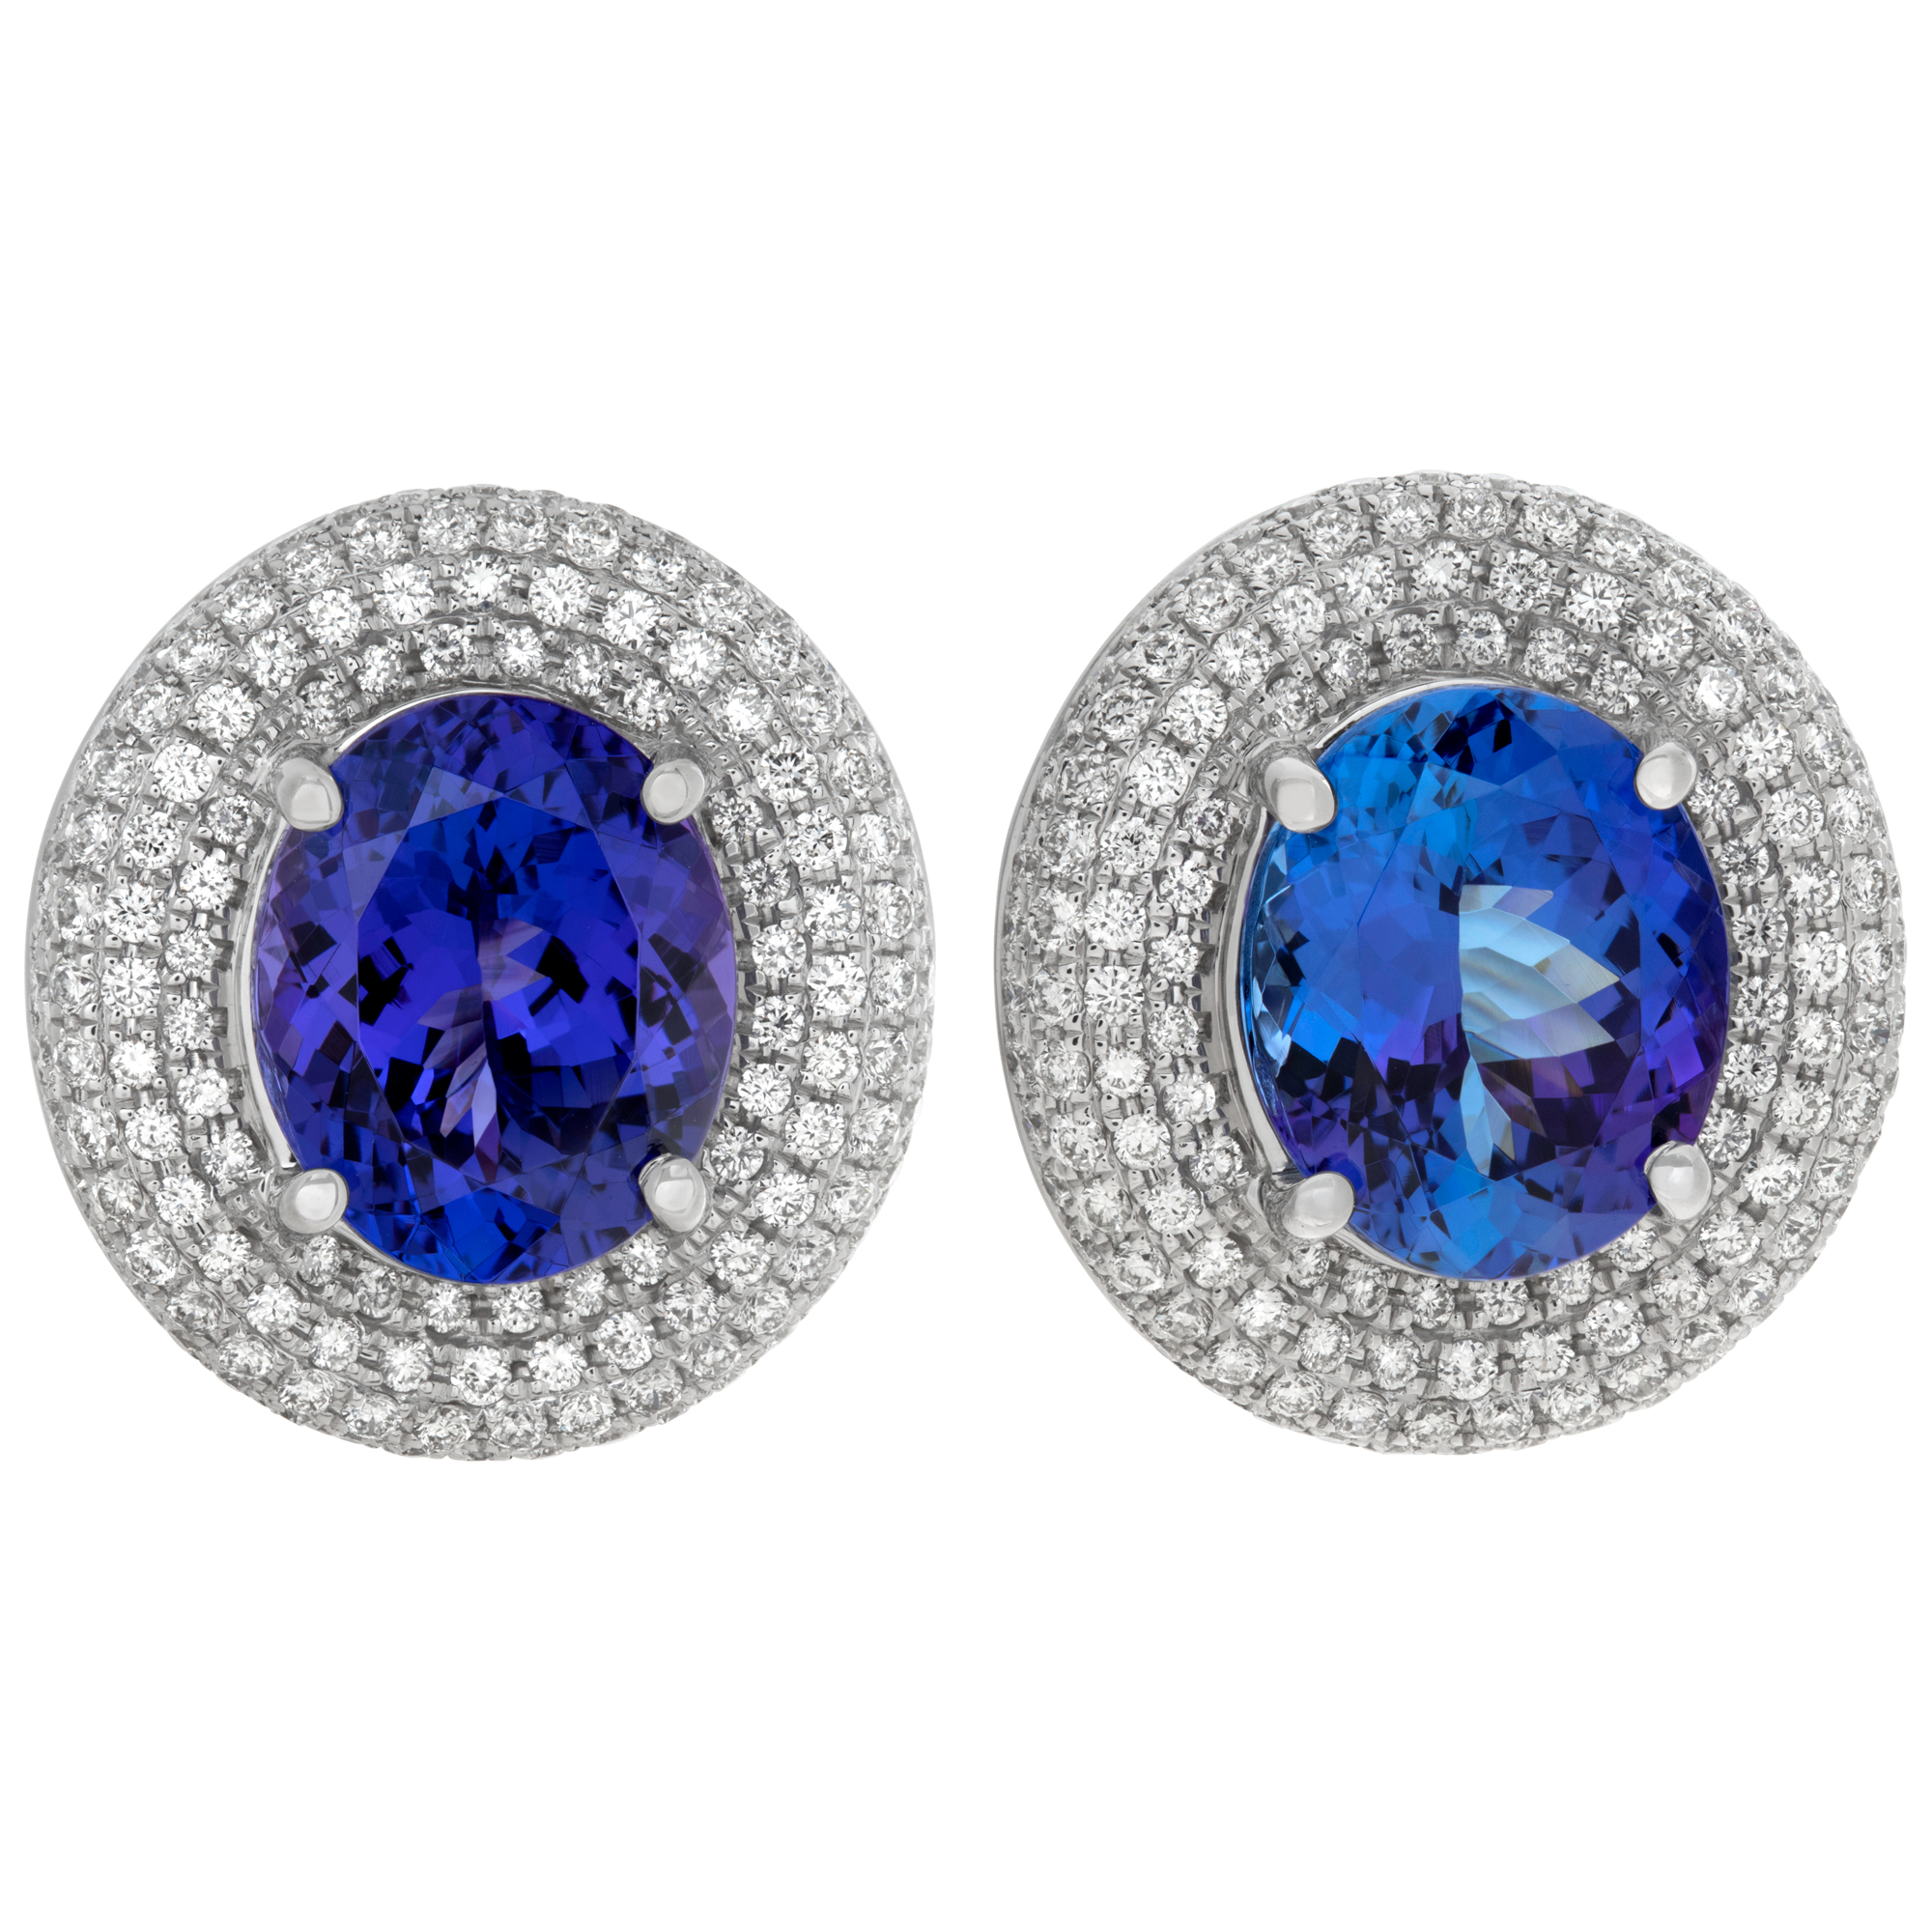 Tanzanite and Diamond earrings with 1.19 carats in diamonds and 7.15 carats in tanzanite.